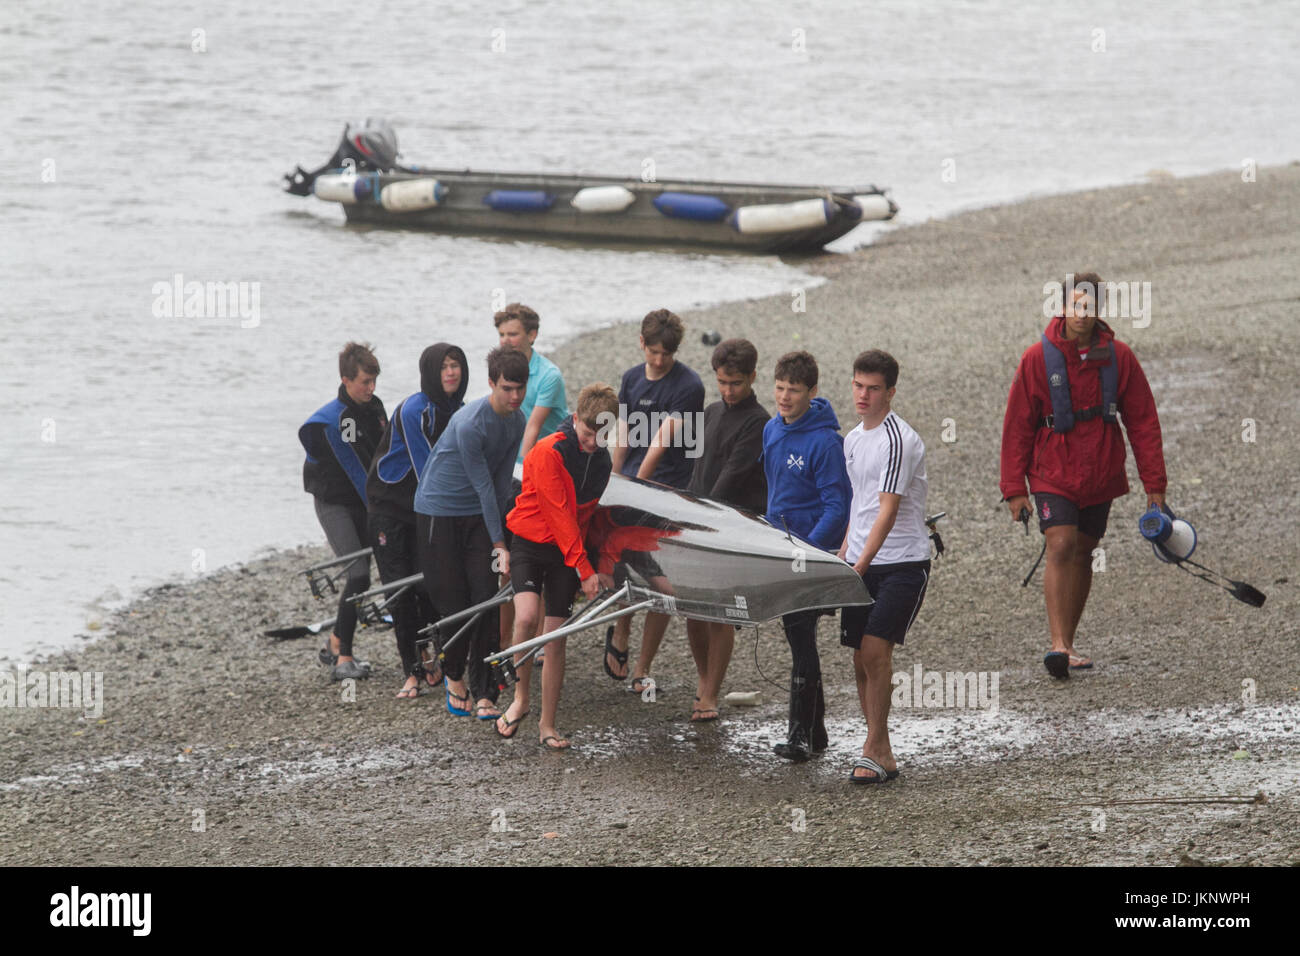 London UK. 24th July 2017. Rowers with sculling boats experience overcast cloudy conditions on River Thames in  Putney  Credit: amer ghazzal/Alamy Live News Stock Photo